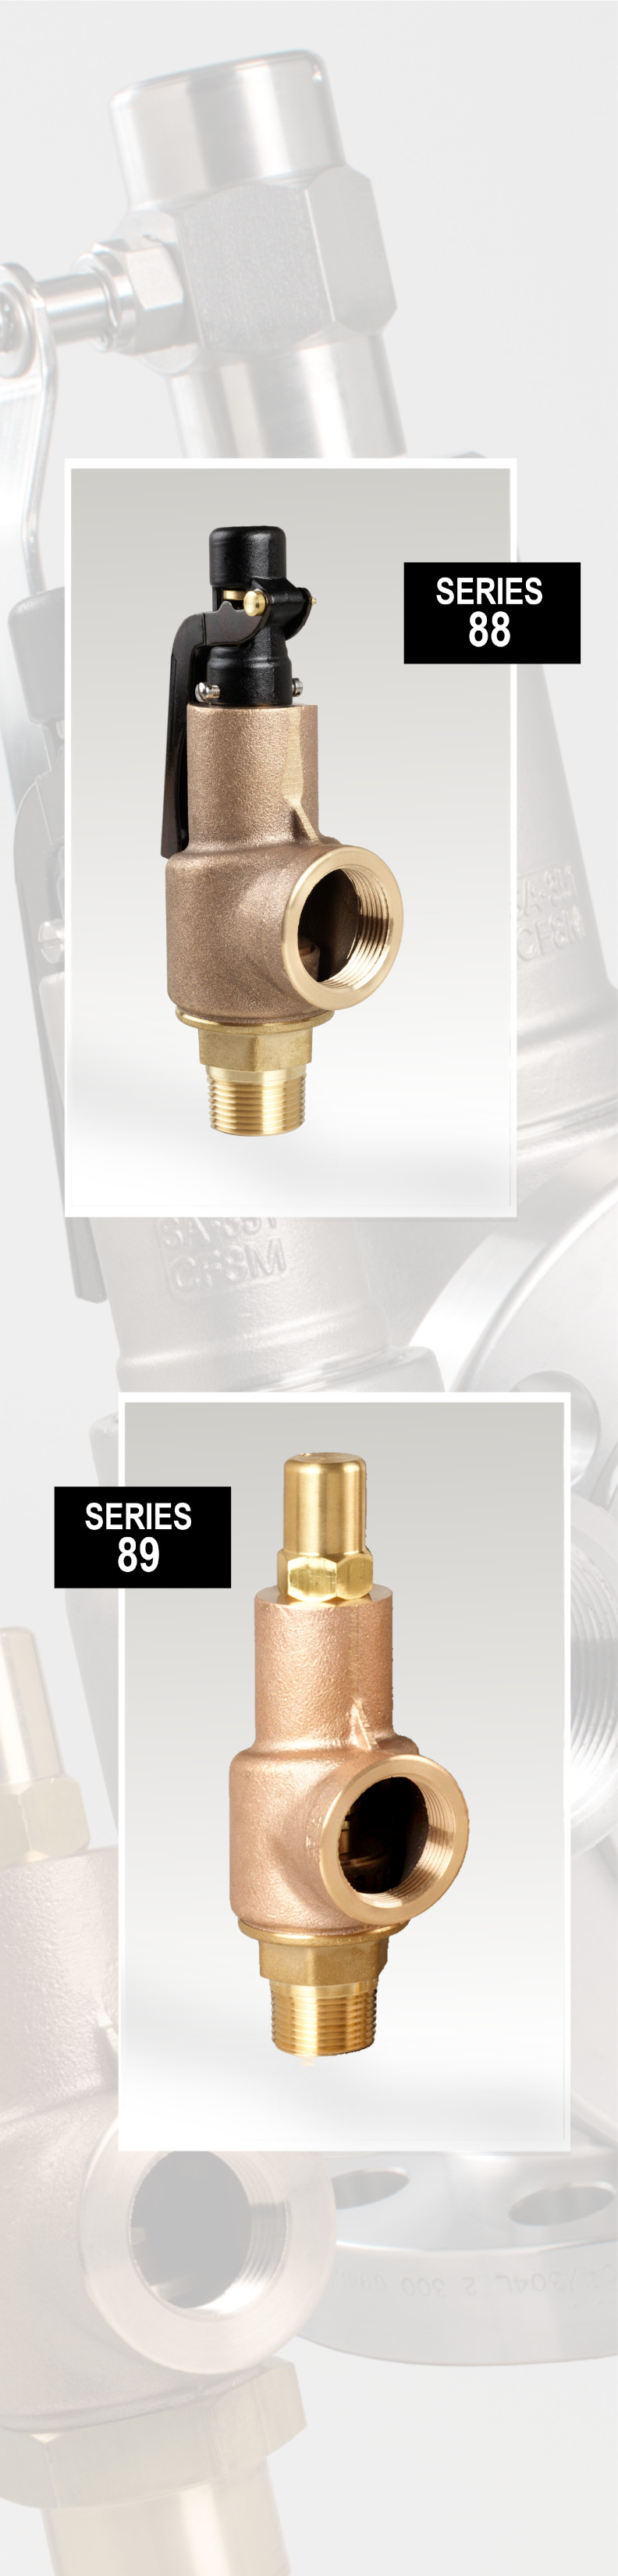 Series 88 brass safety valves with cap options